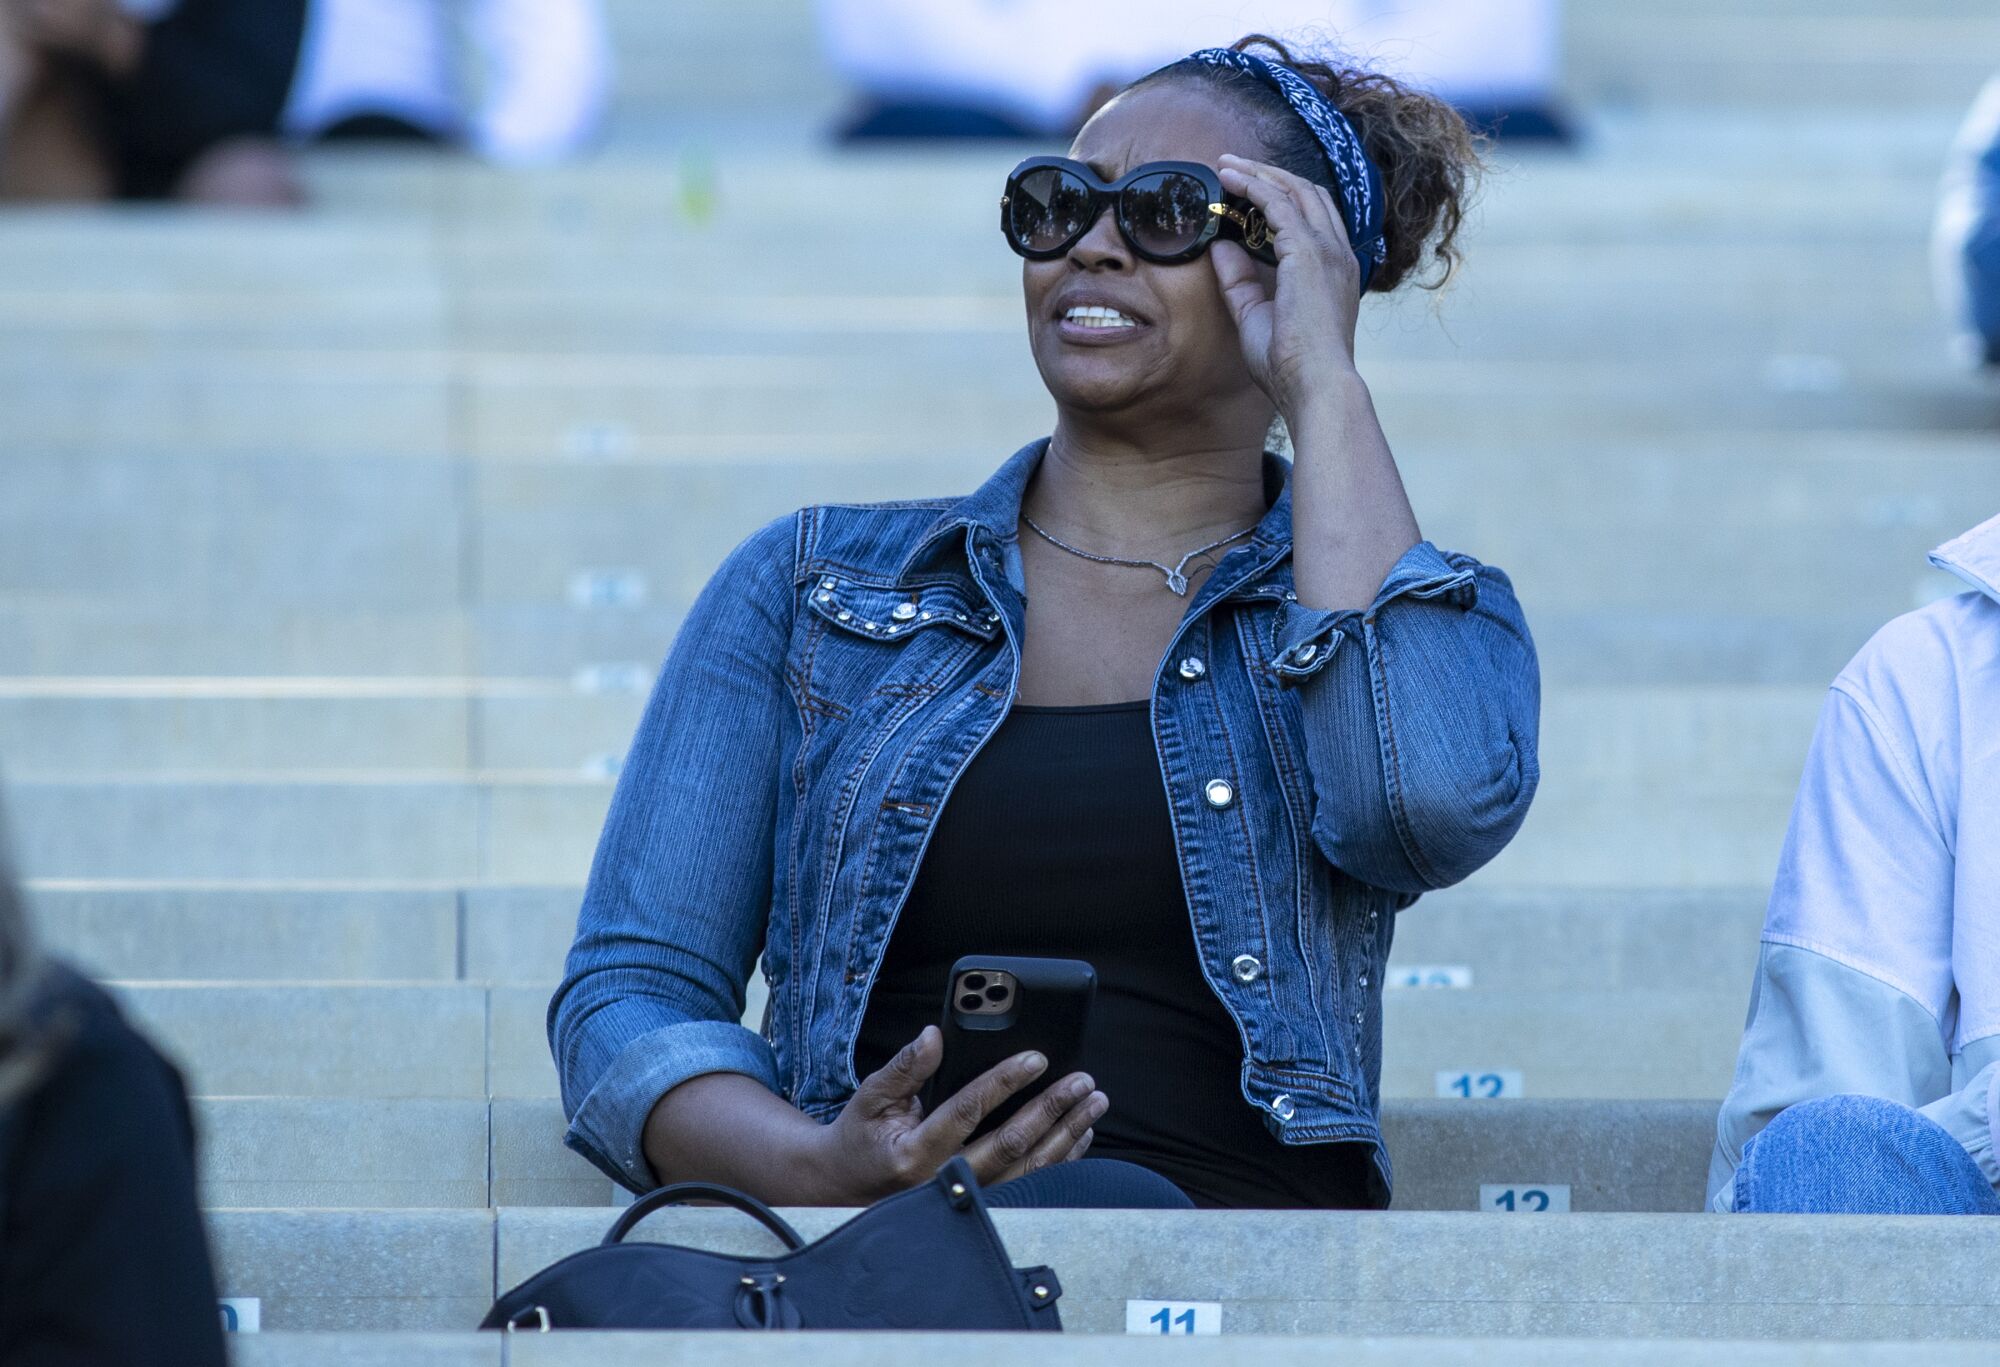 A woman sitting in a grandstand adjusts her sunglasses